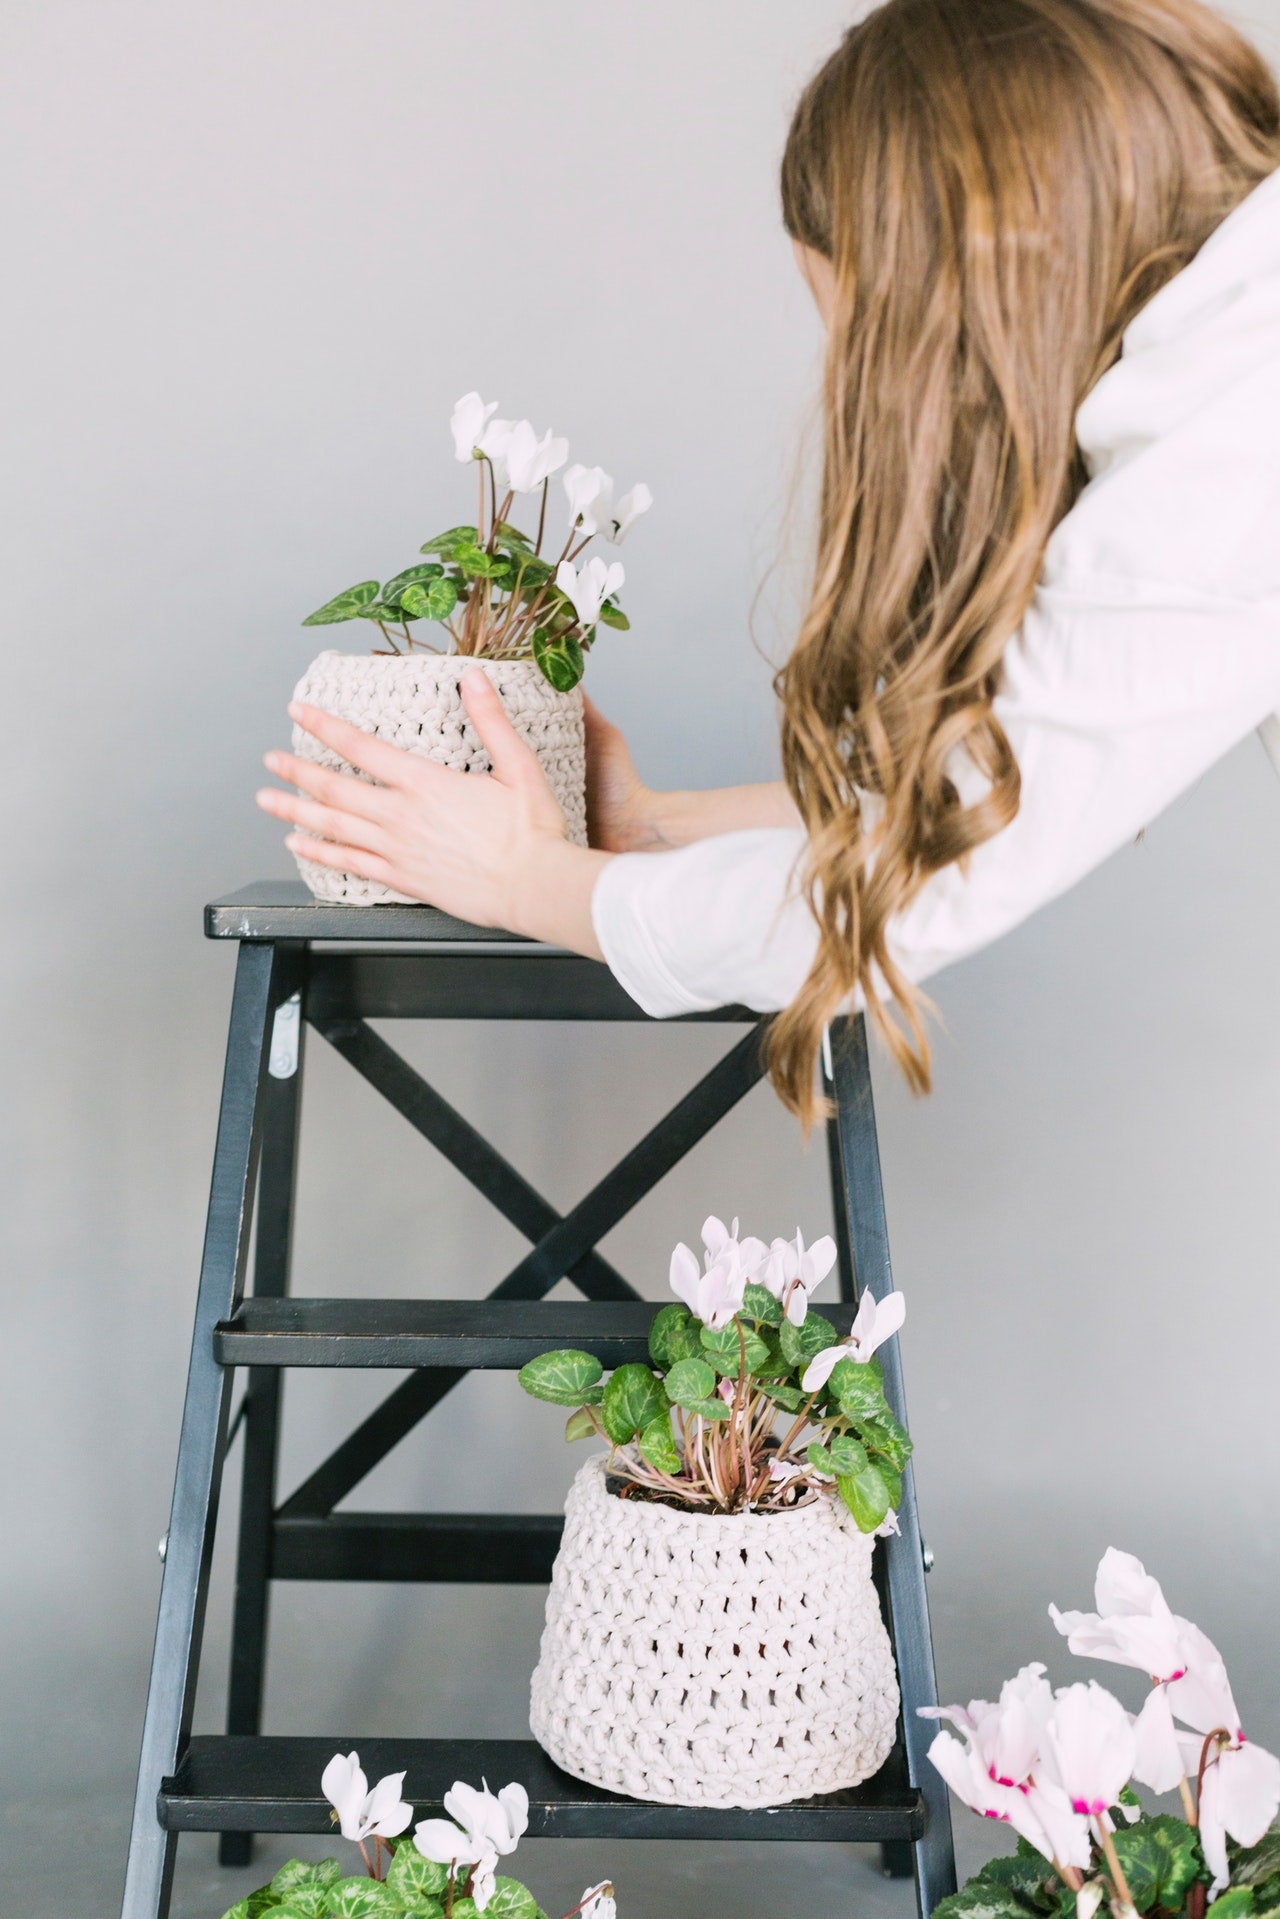 The Four Indoor Plant Care Essentials No One Talks About